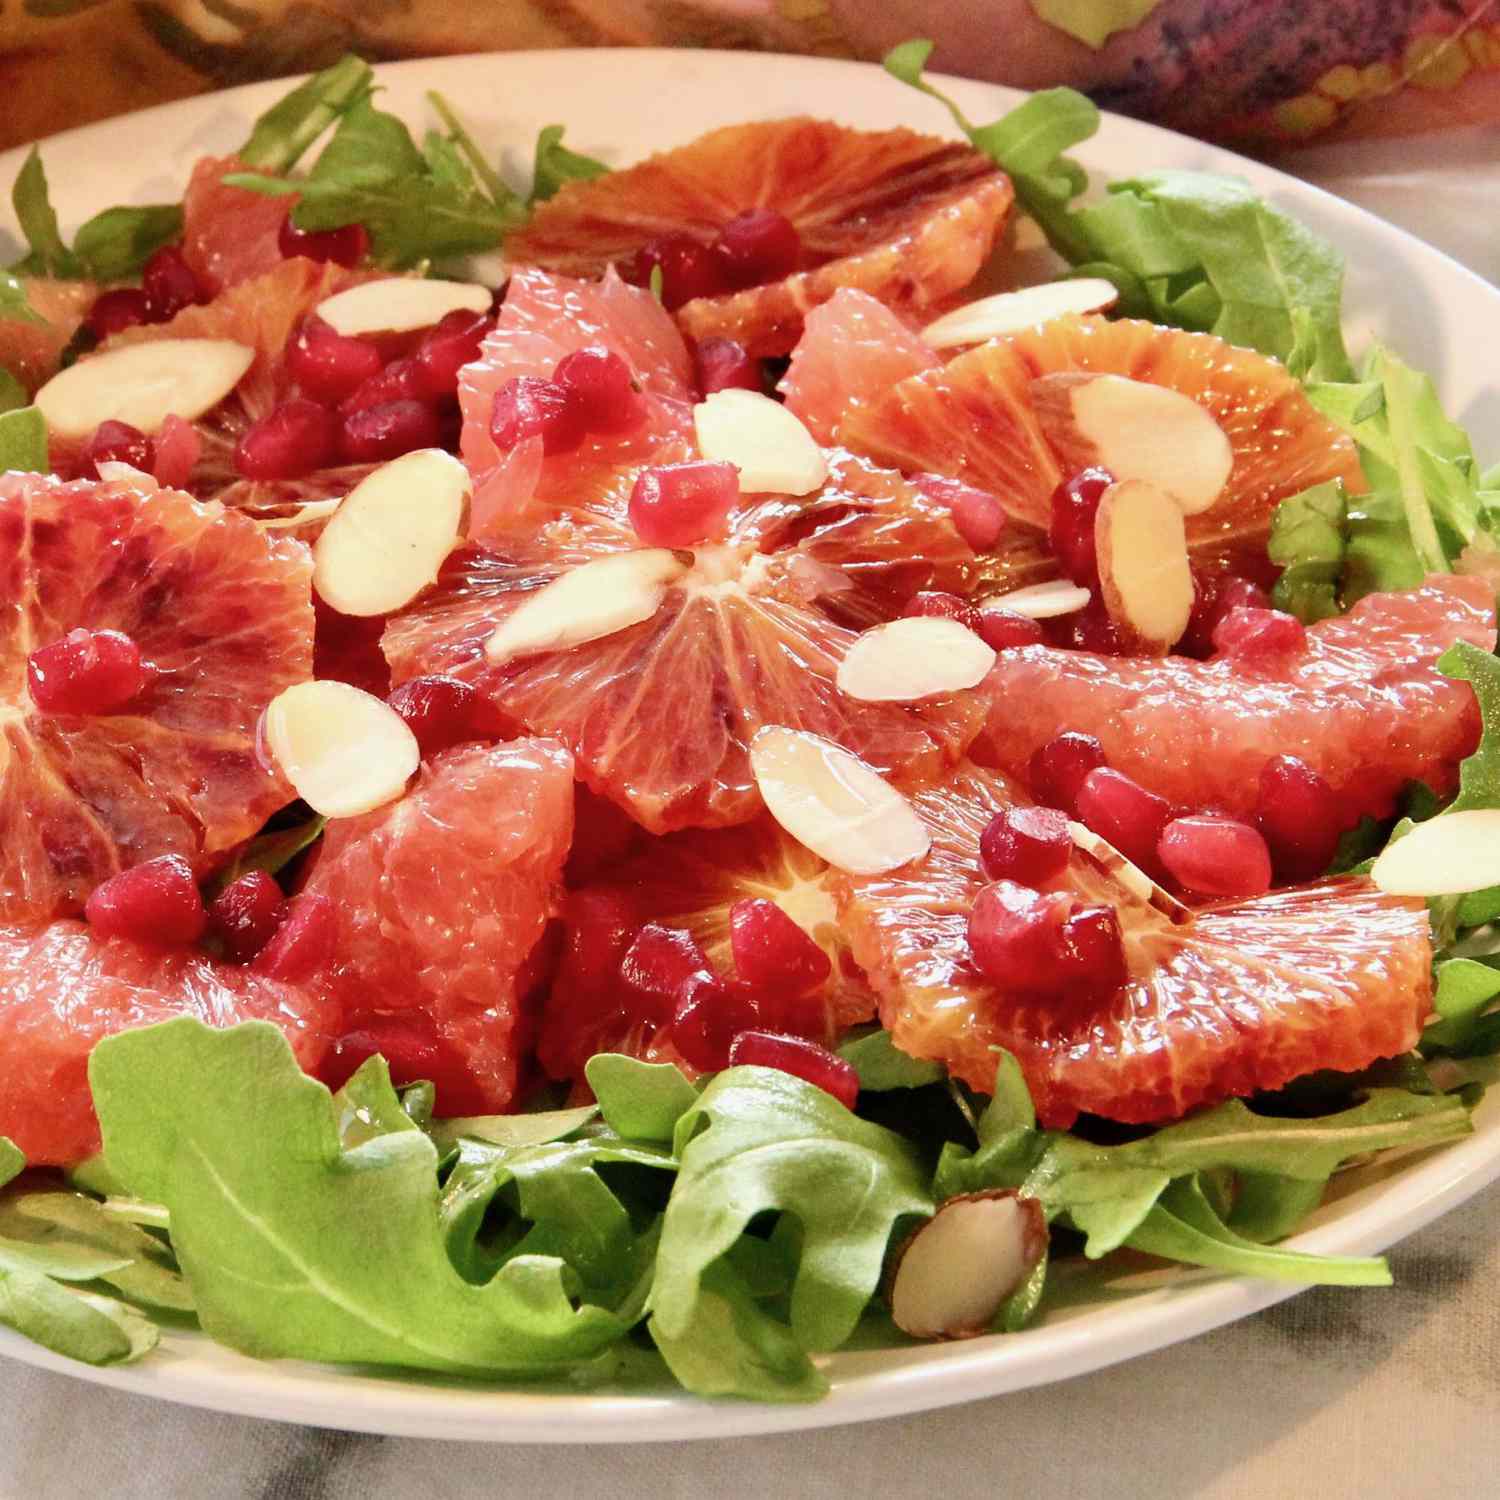 salad with blood orange and grapefruit with almond slivers on top